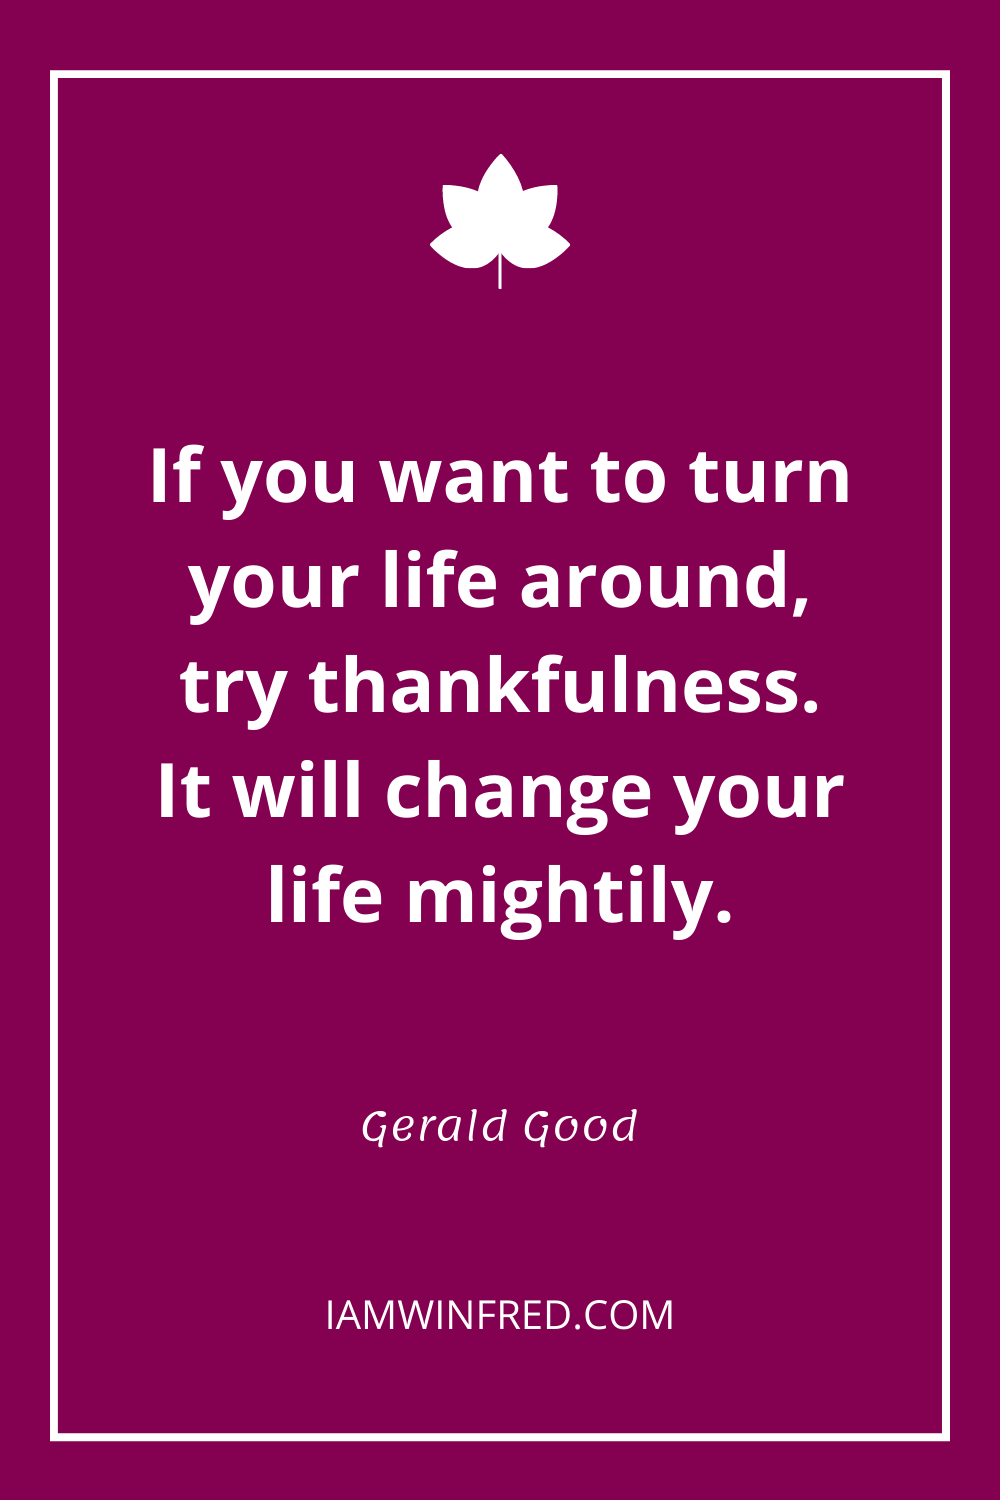 If You Want To Turn Your Life Around Try Thankfulness. It Will Change Your Life Mightily.